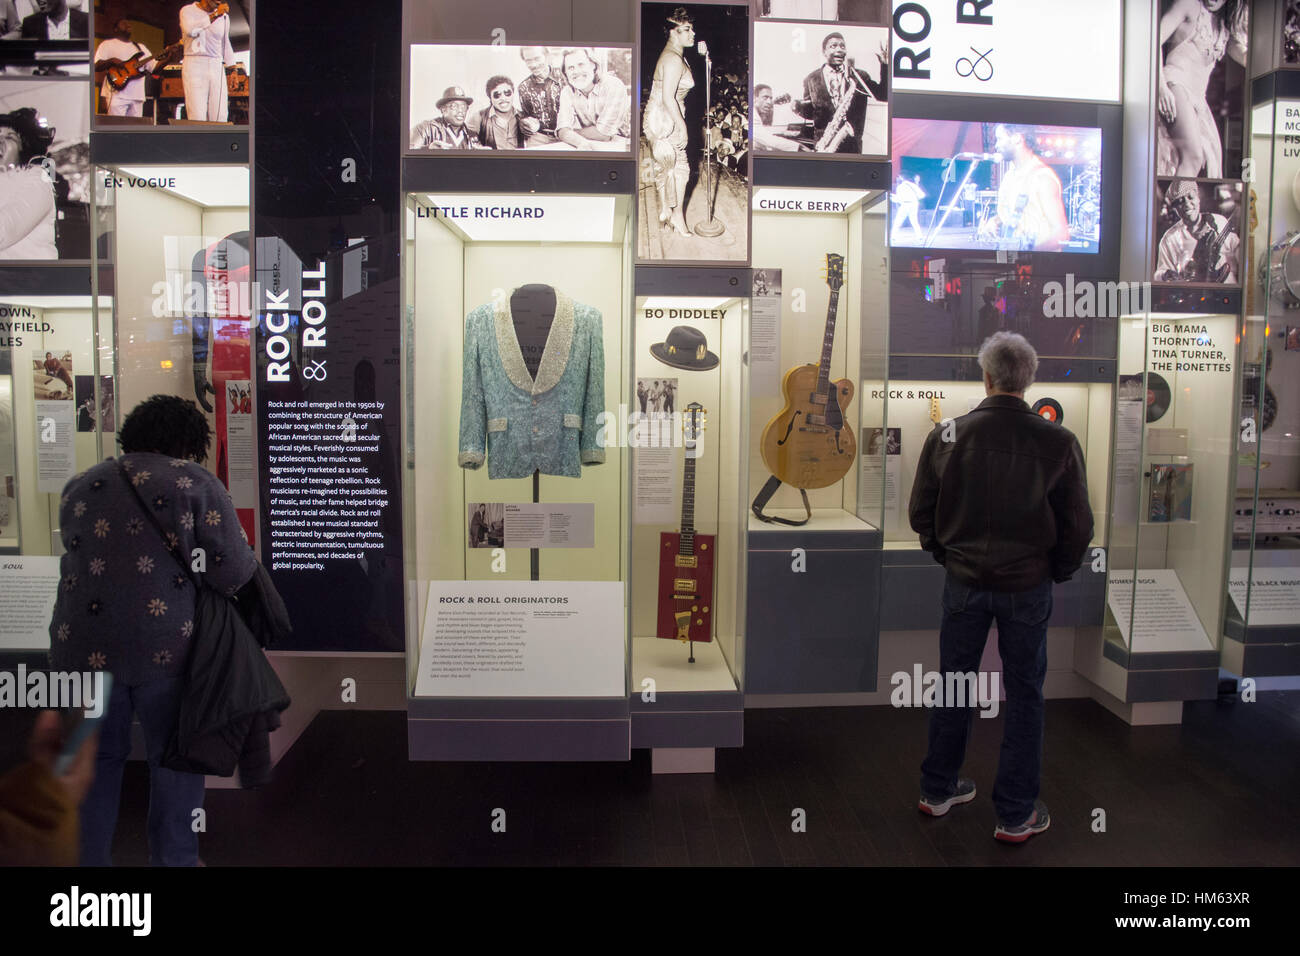 Artifacts belonging to Rock and Roll originators LIttle Richard, Bo DiddleBerry, the National Museum of African American History and Culture, Washingt Stock Photo